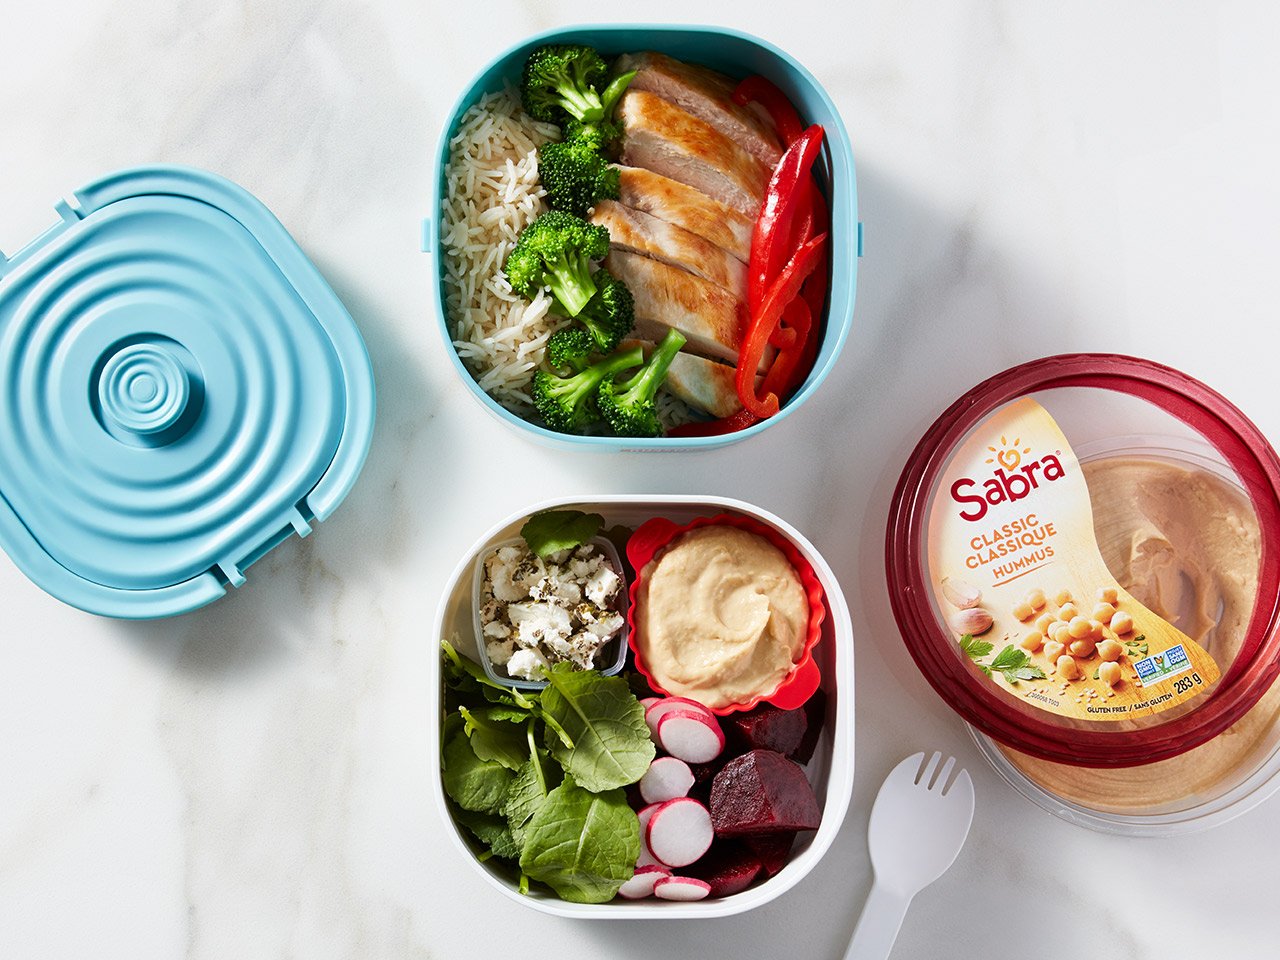 https://chatelaine.com/wp-content/uploads/2019/05/Sabra_Bento-lunch_Lunch.jpg